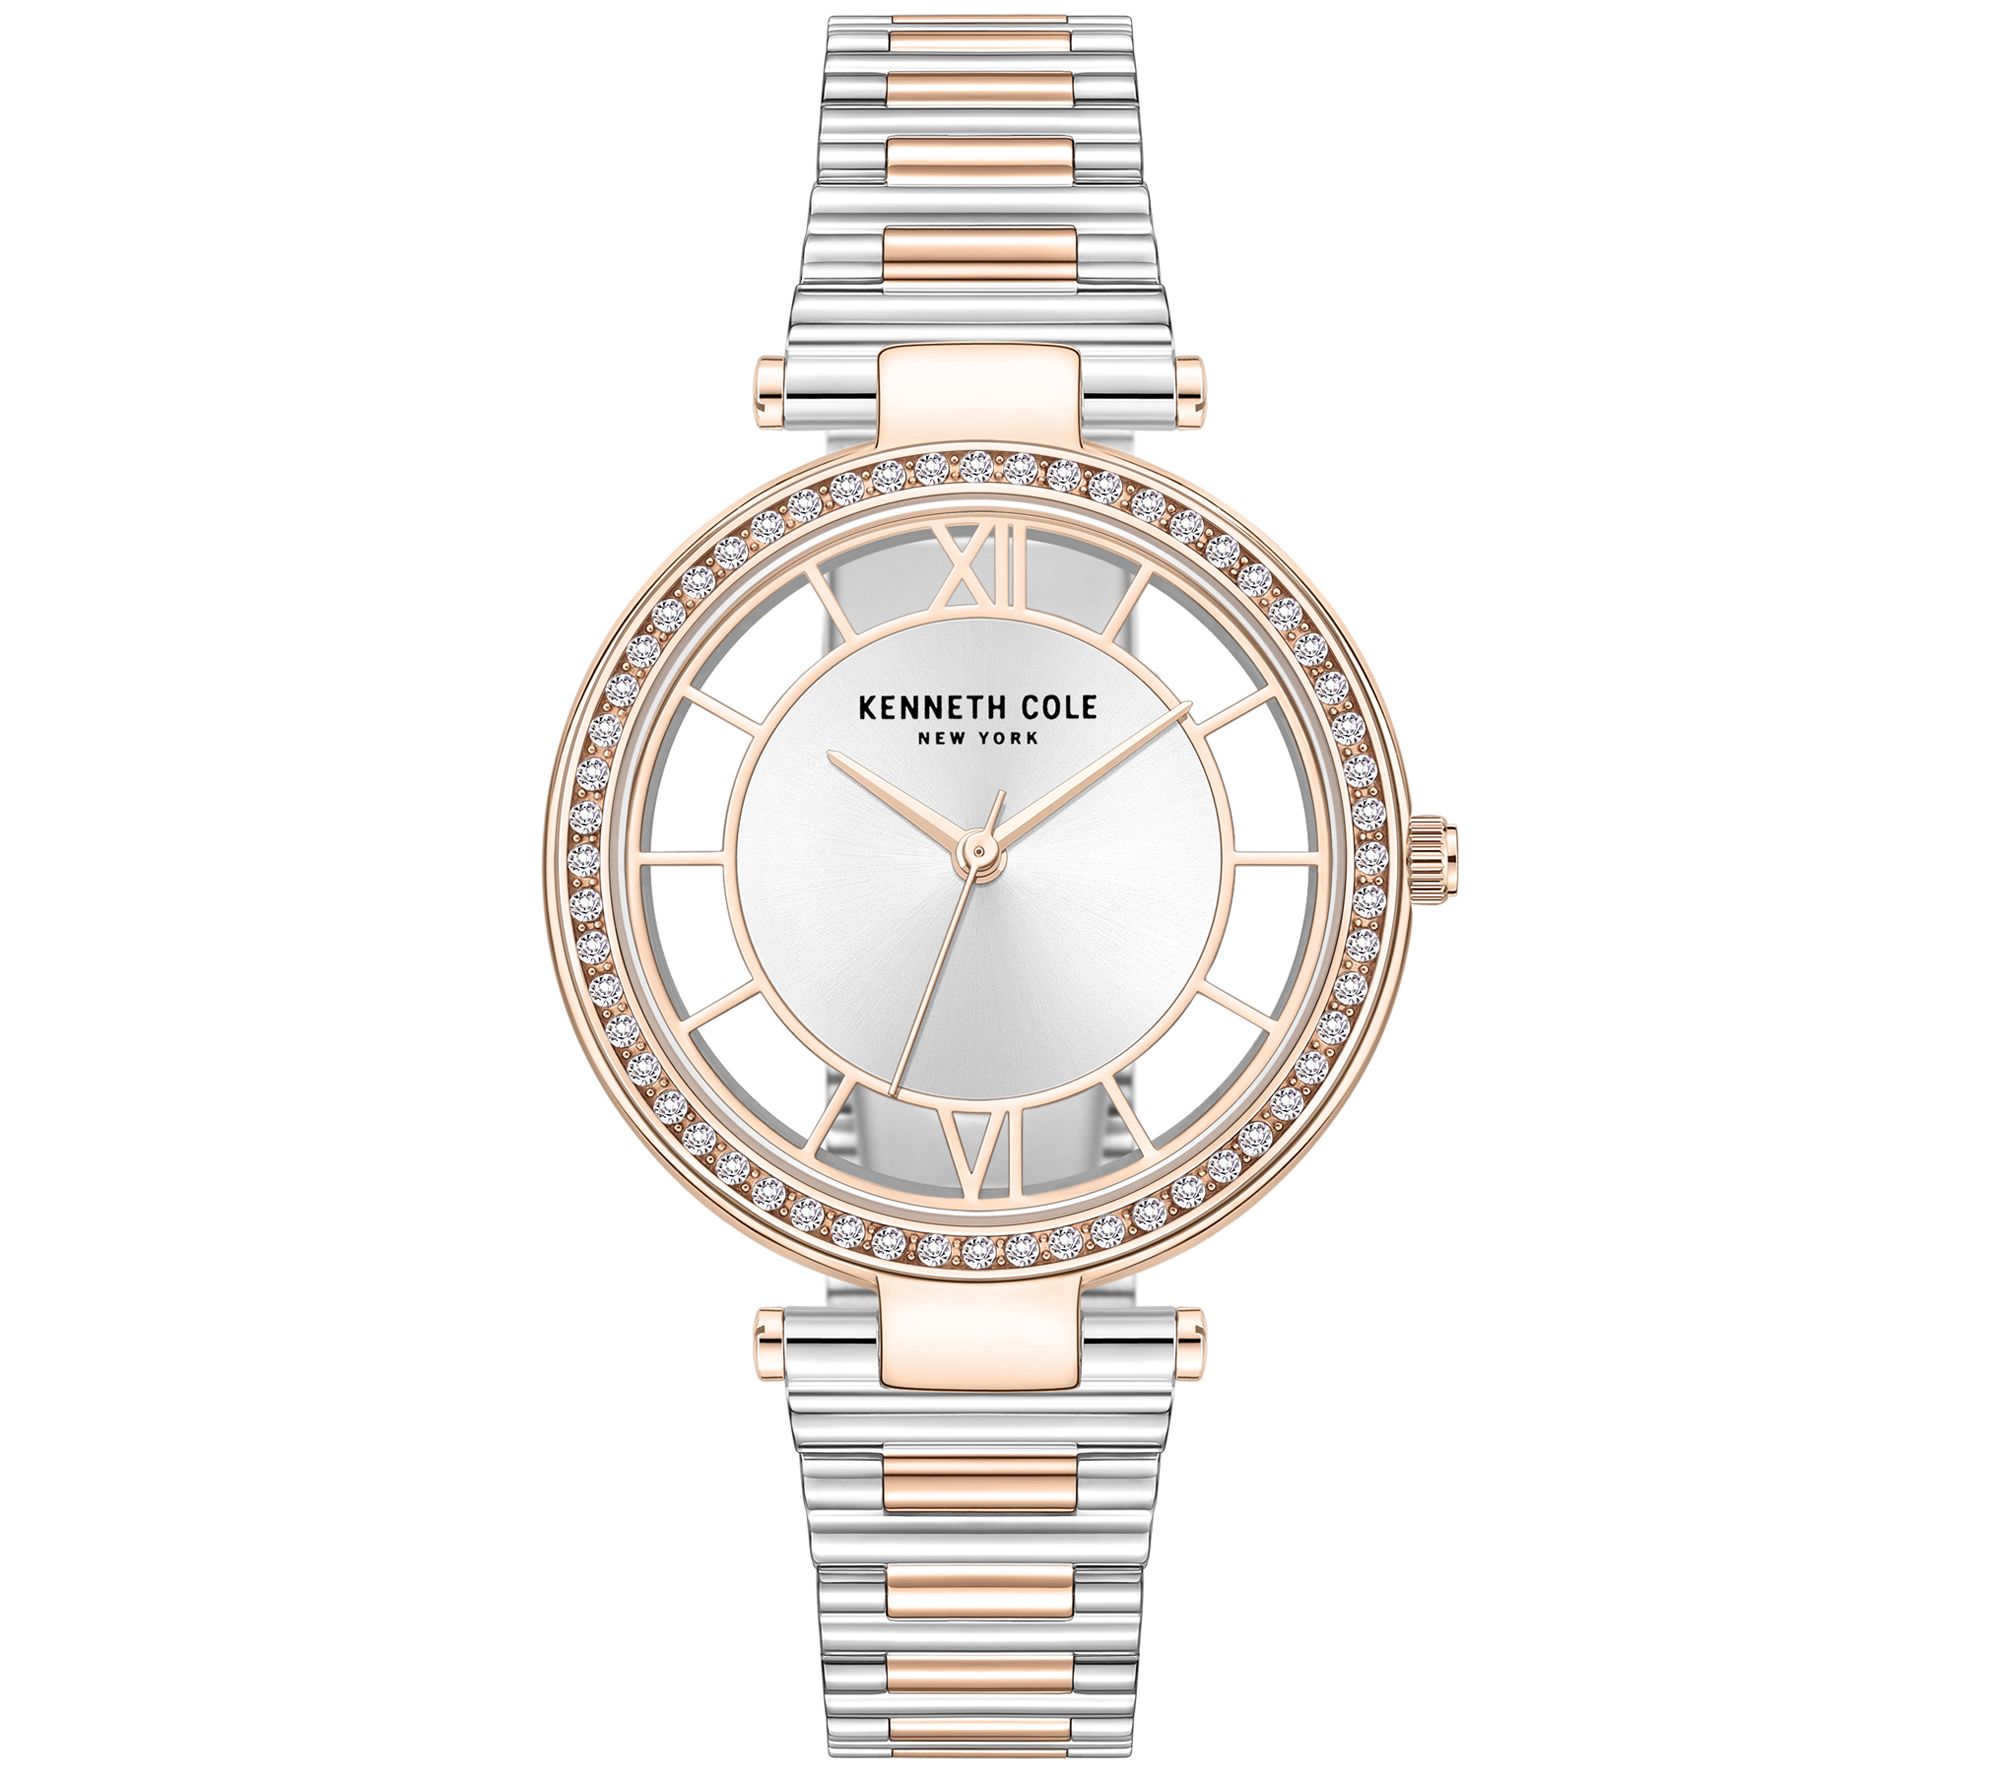 Kenneth Cole New York Women's Crystal Transpare ncy Watch - QVC.com